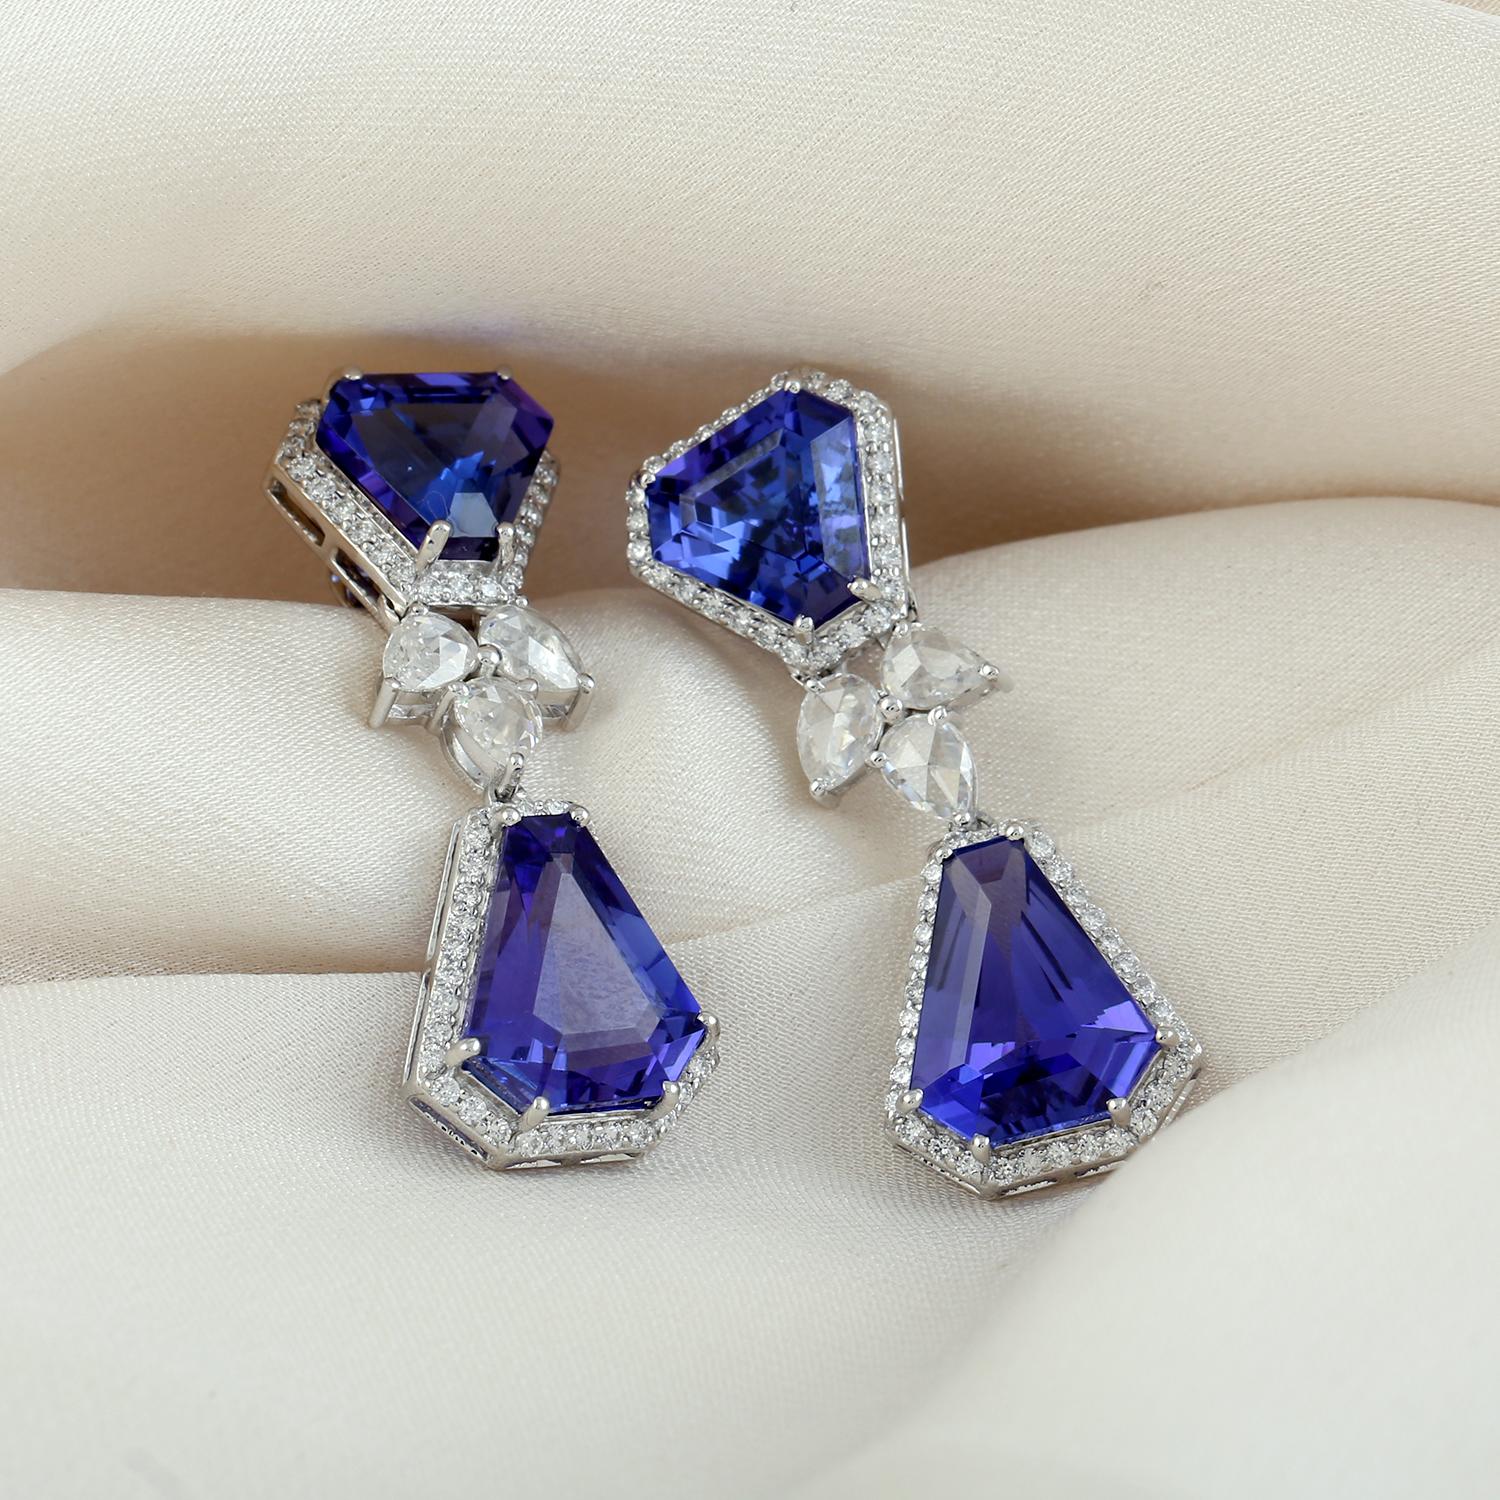 Contemporary 17.47ct Blue Tanzanite Dangle Earrings With Rosecut Diamonds In 18k White Gold For Sale